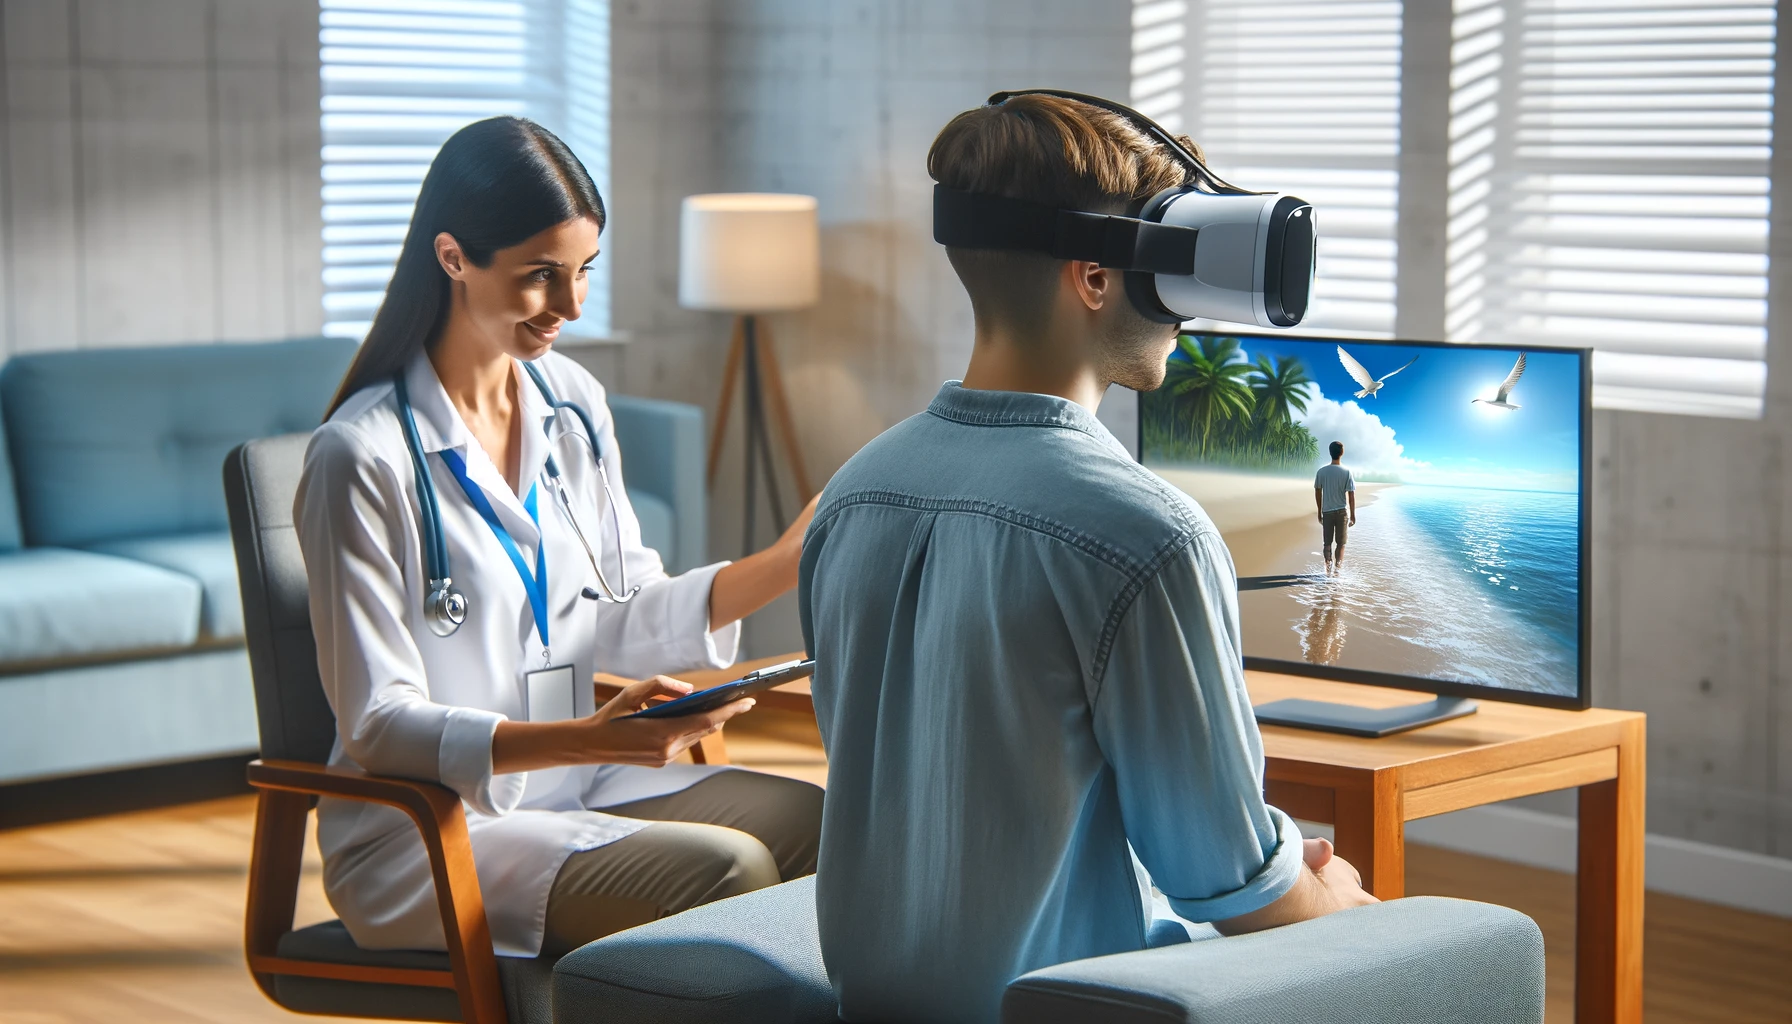 A therapist using virtual reality to conduct an anxiety treatment session with a patient. The image features the therapist in a quiet office, assisting a patient wearing a VR viewer in a peaceful virtual environment.